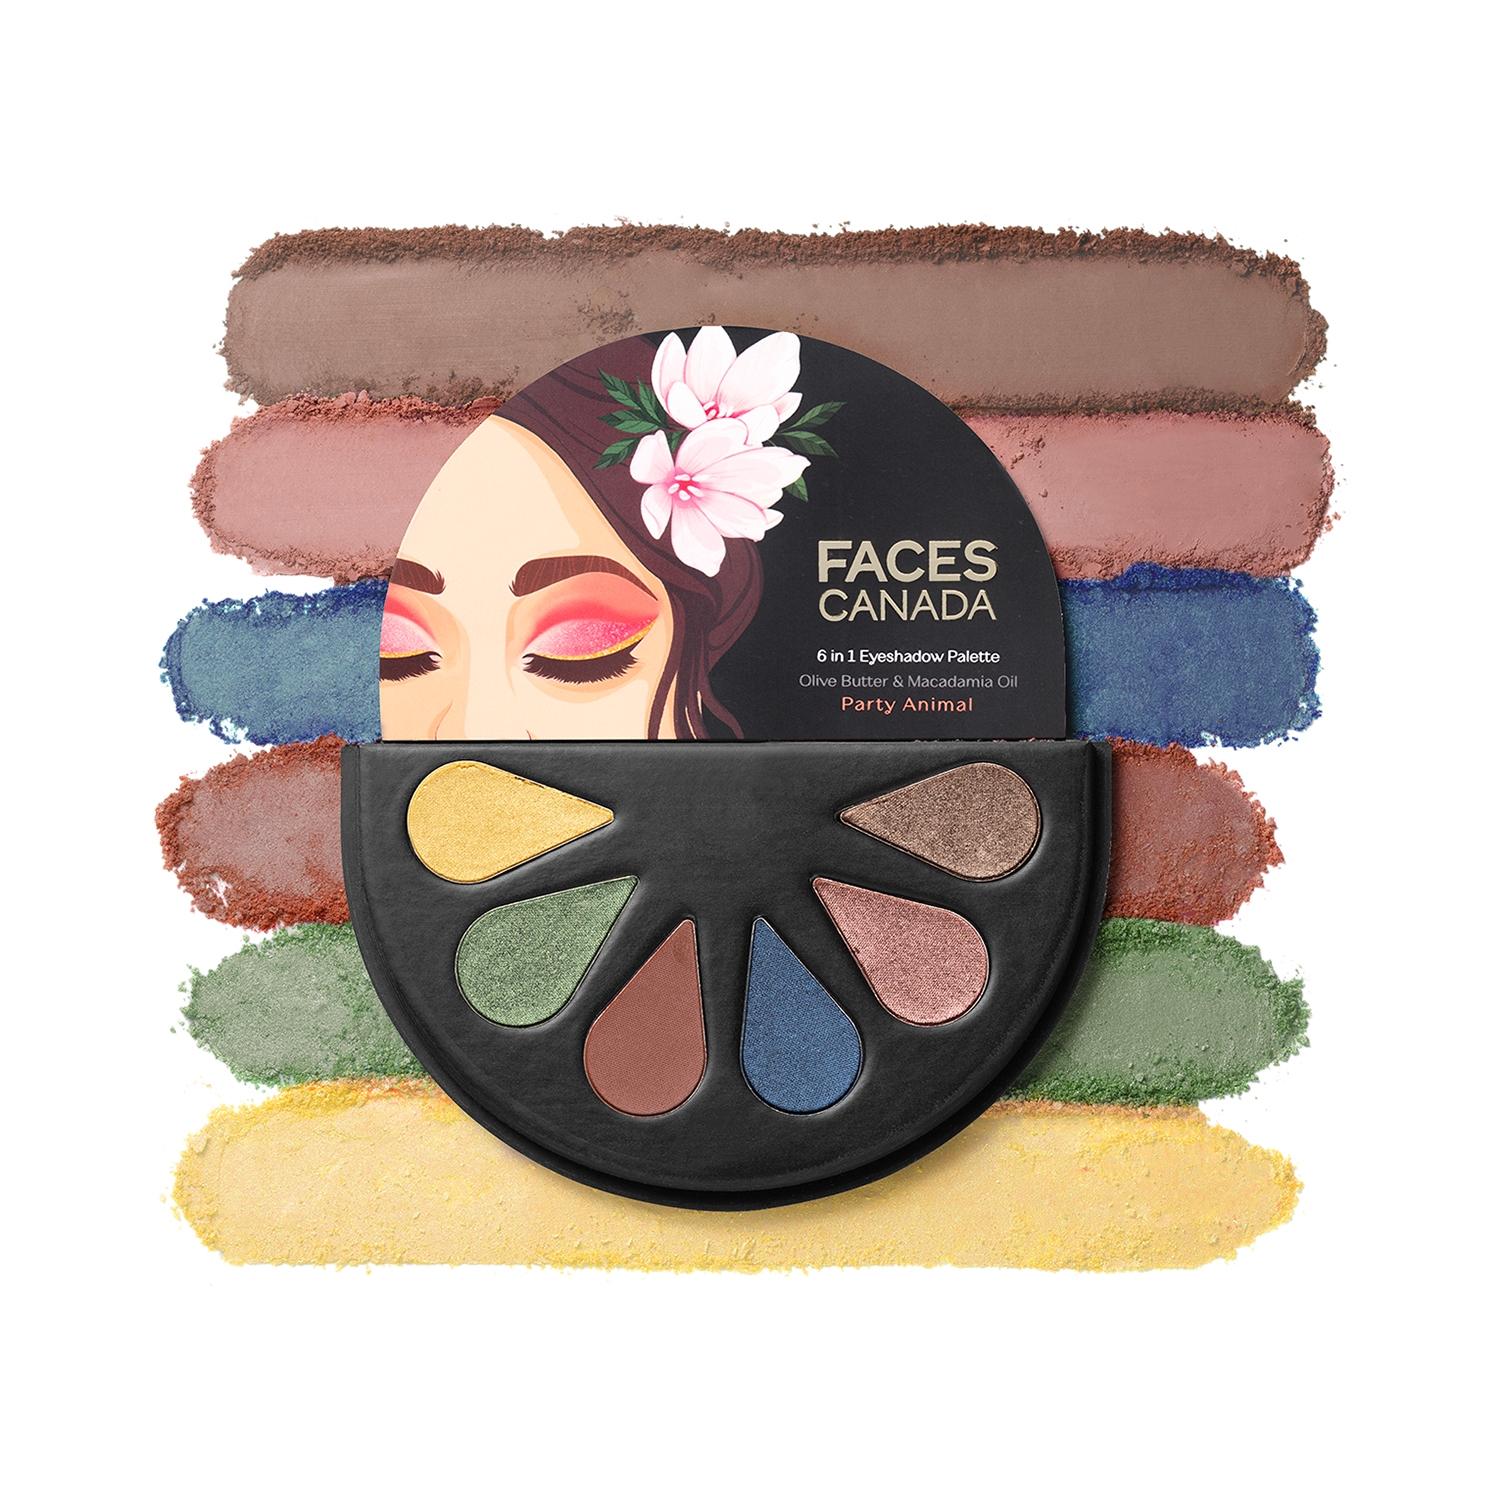 faces canada 6-in-1 eyeshadow palette - 04 party animal (6g)